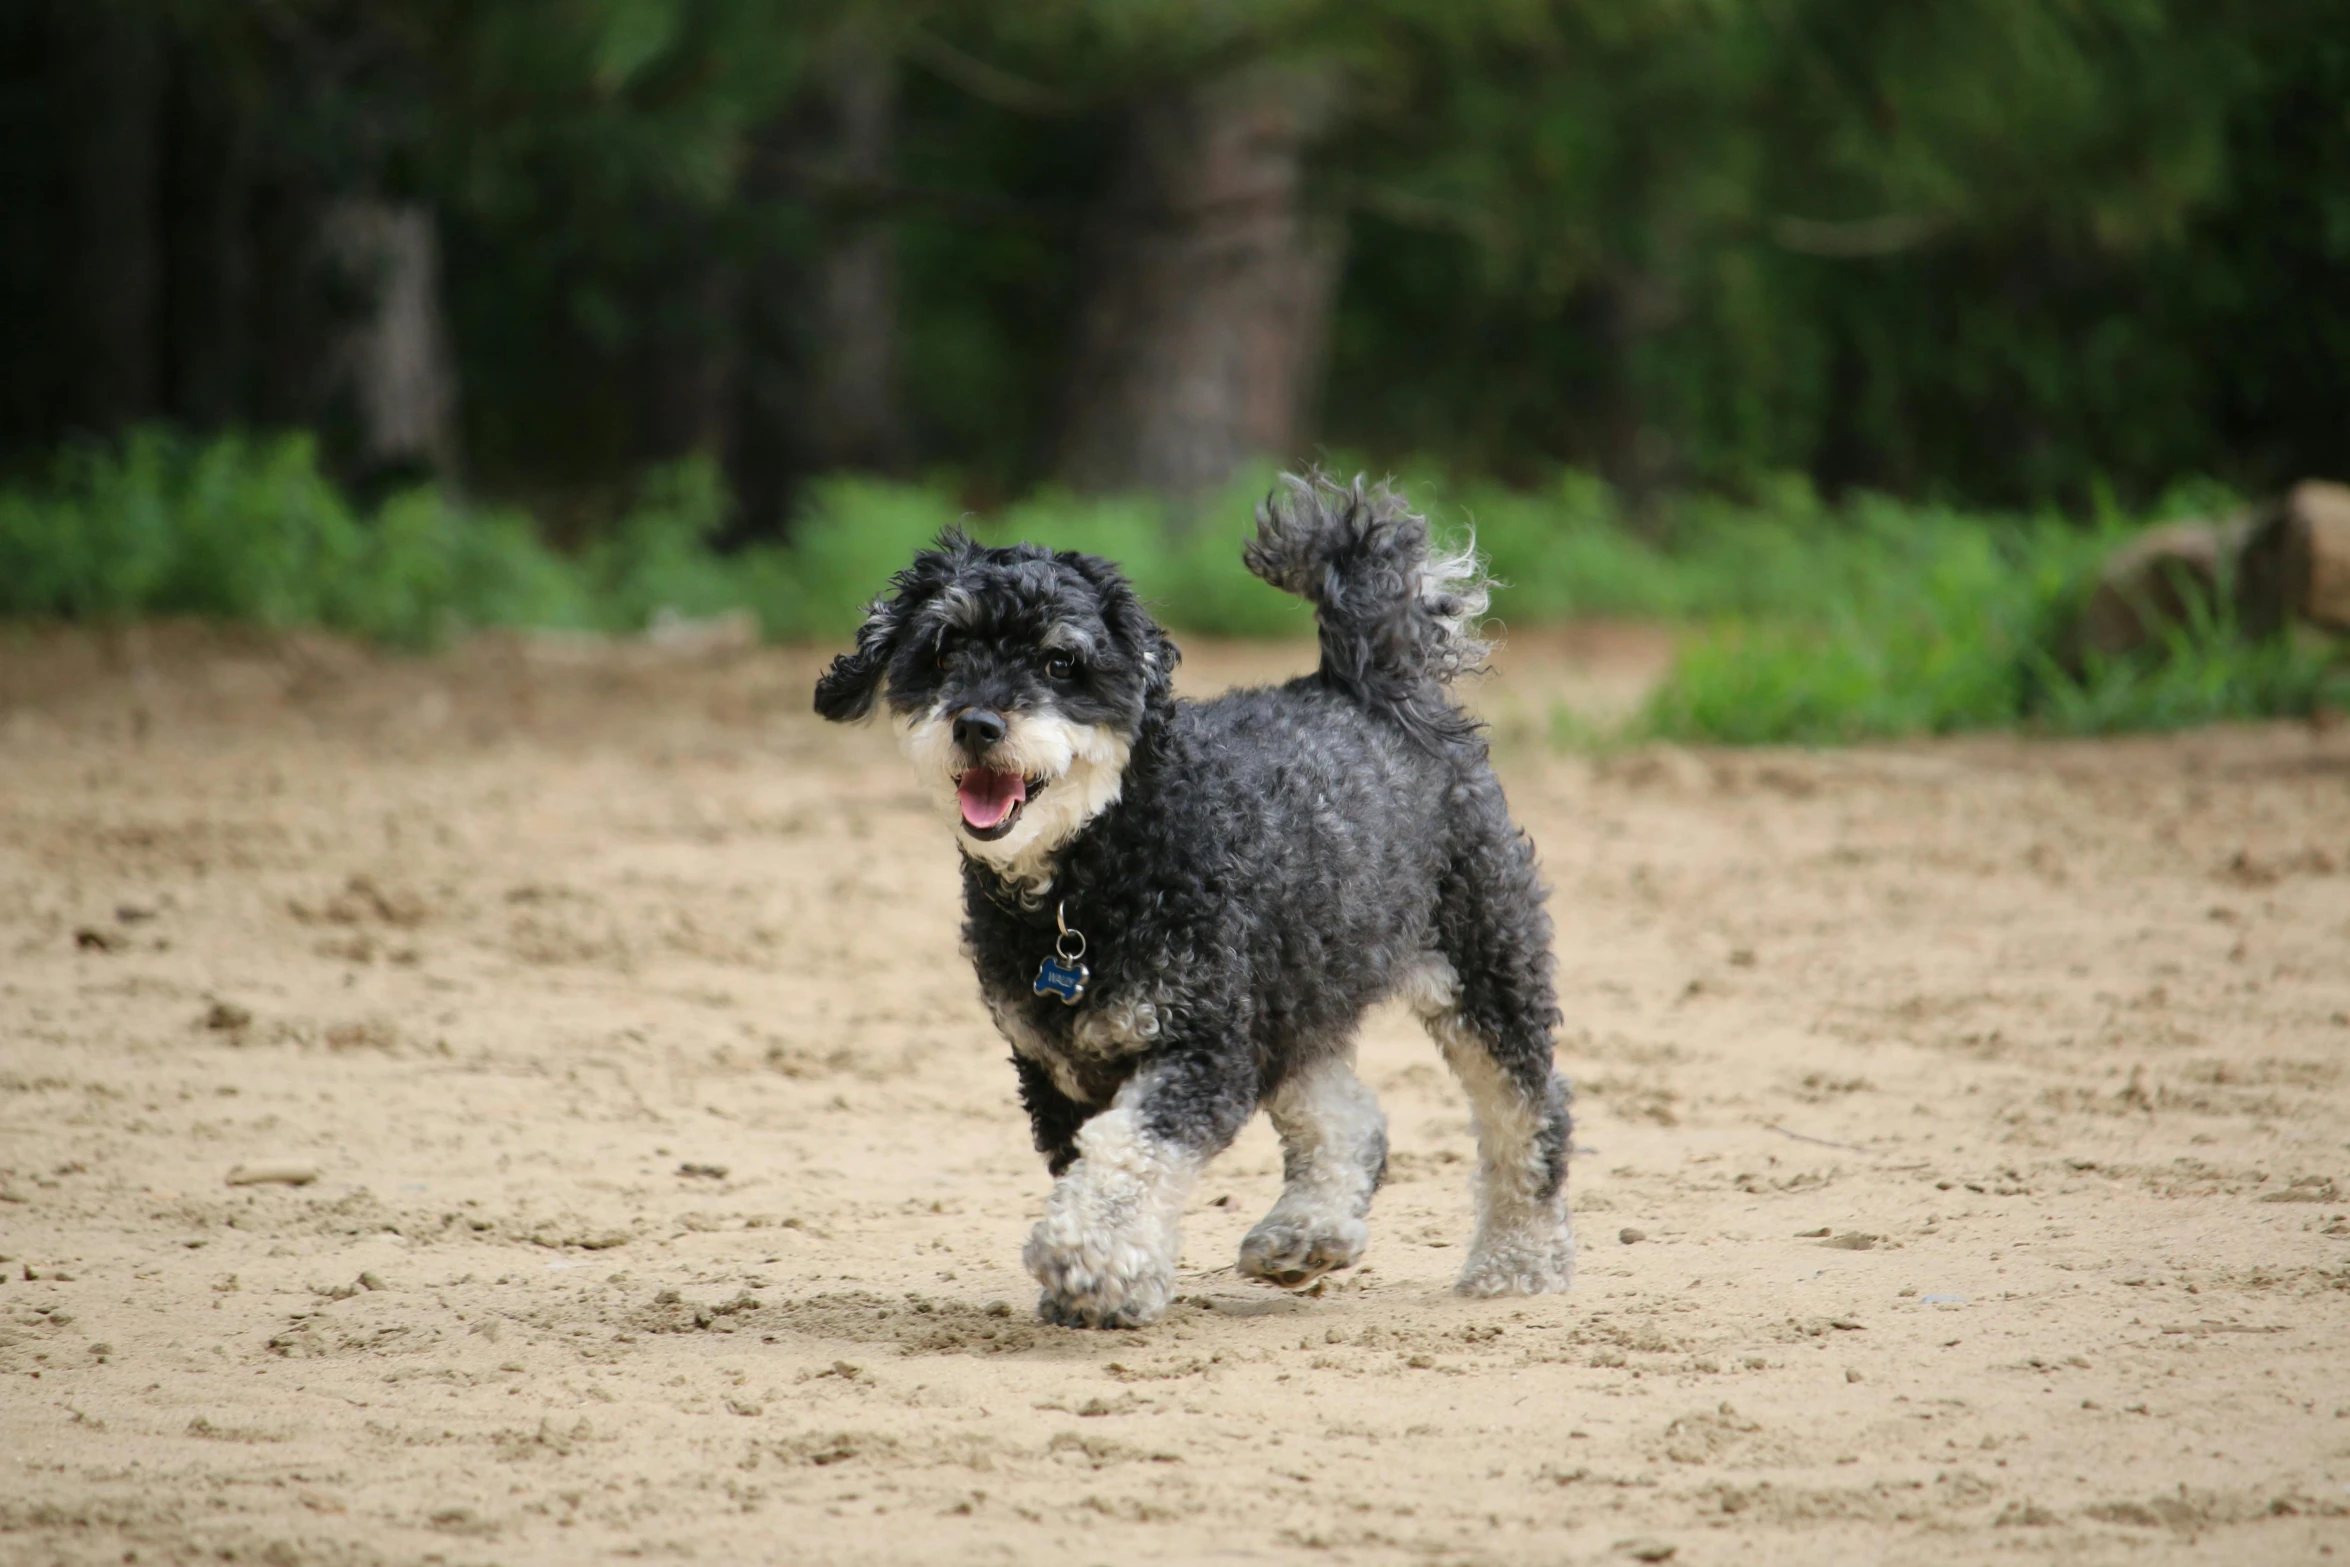 a dog running along a sandy path in the grass